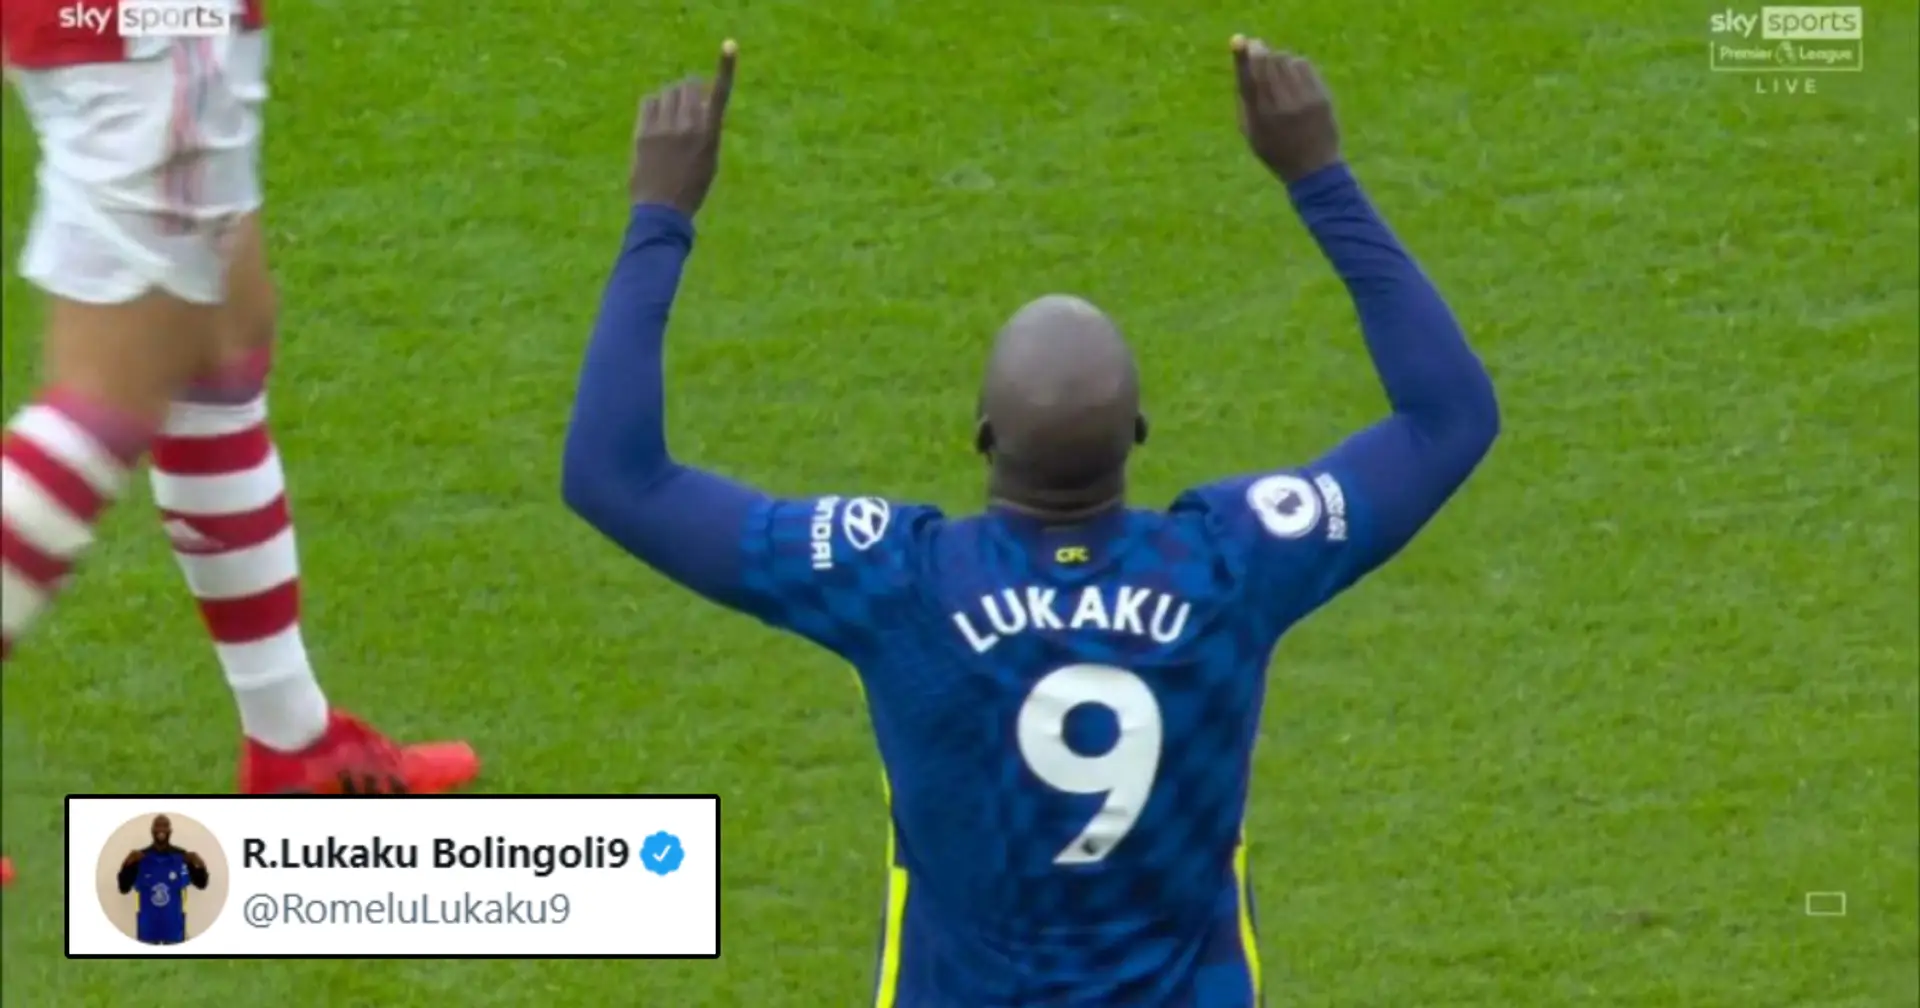 'Childhood dream became reality': Lukaku reacts to derby win on Twitter